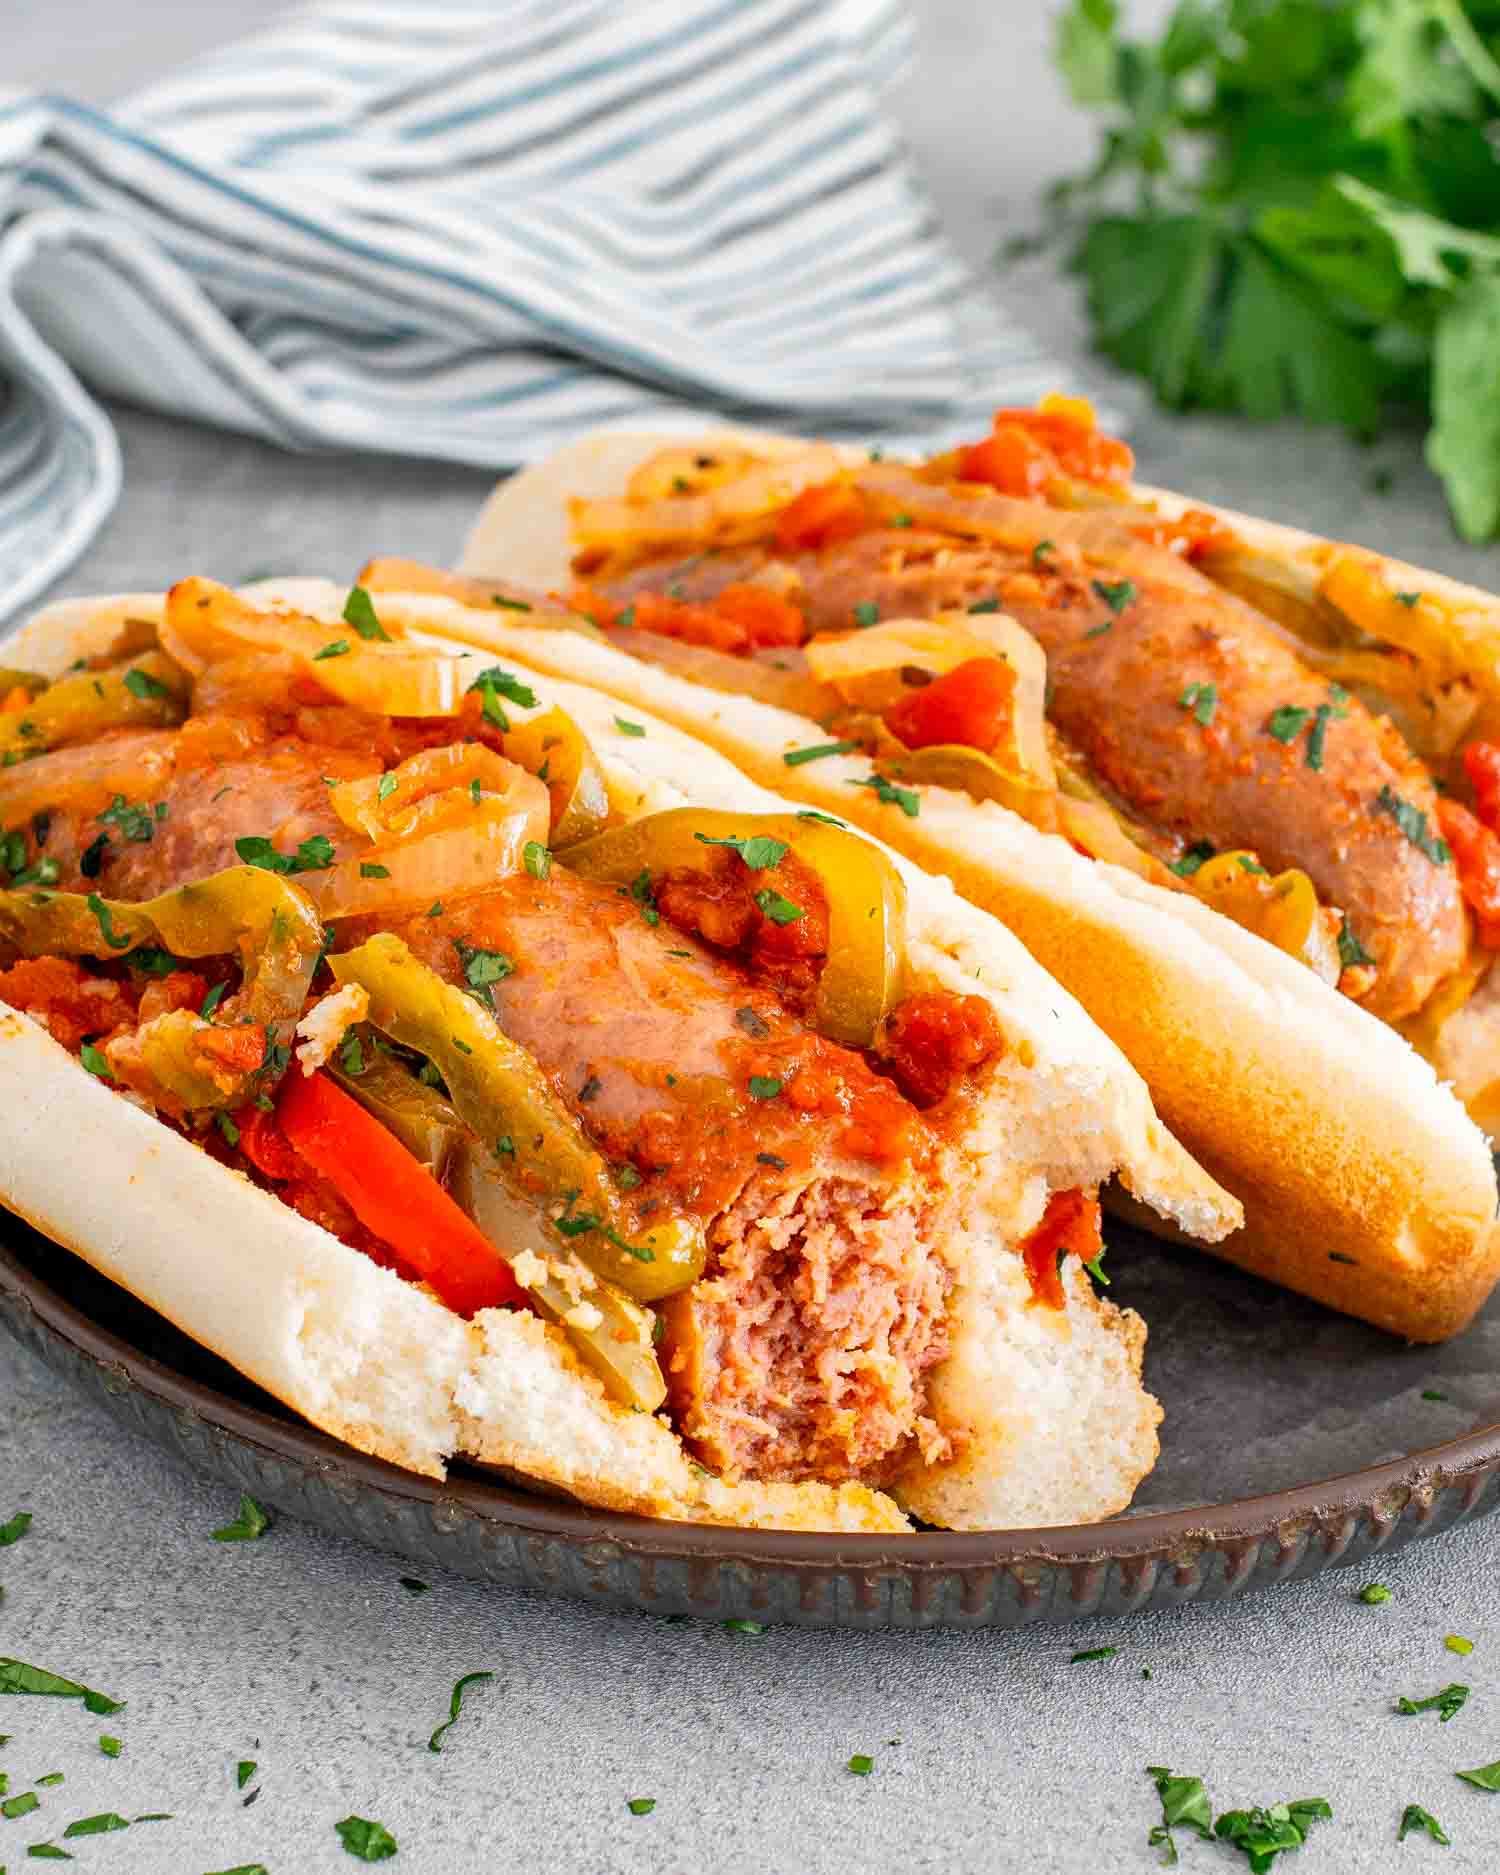 two sausage and peppers hoagie rolls on a plate garnished with some parsley.